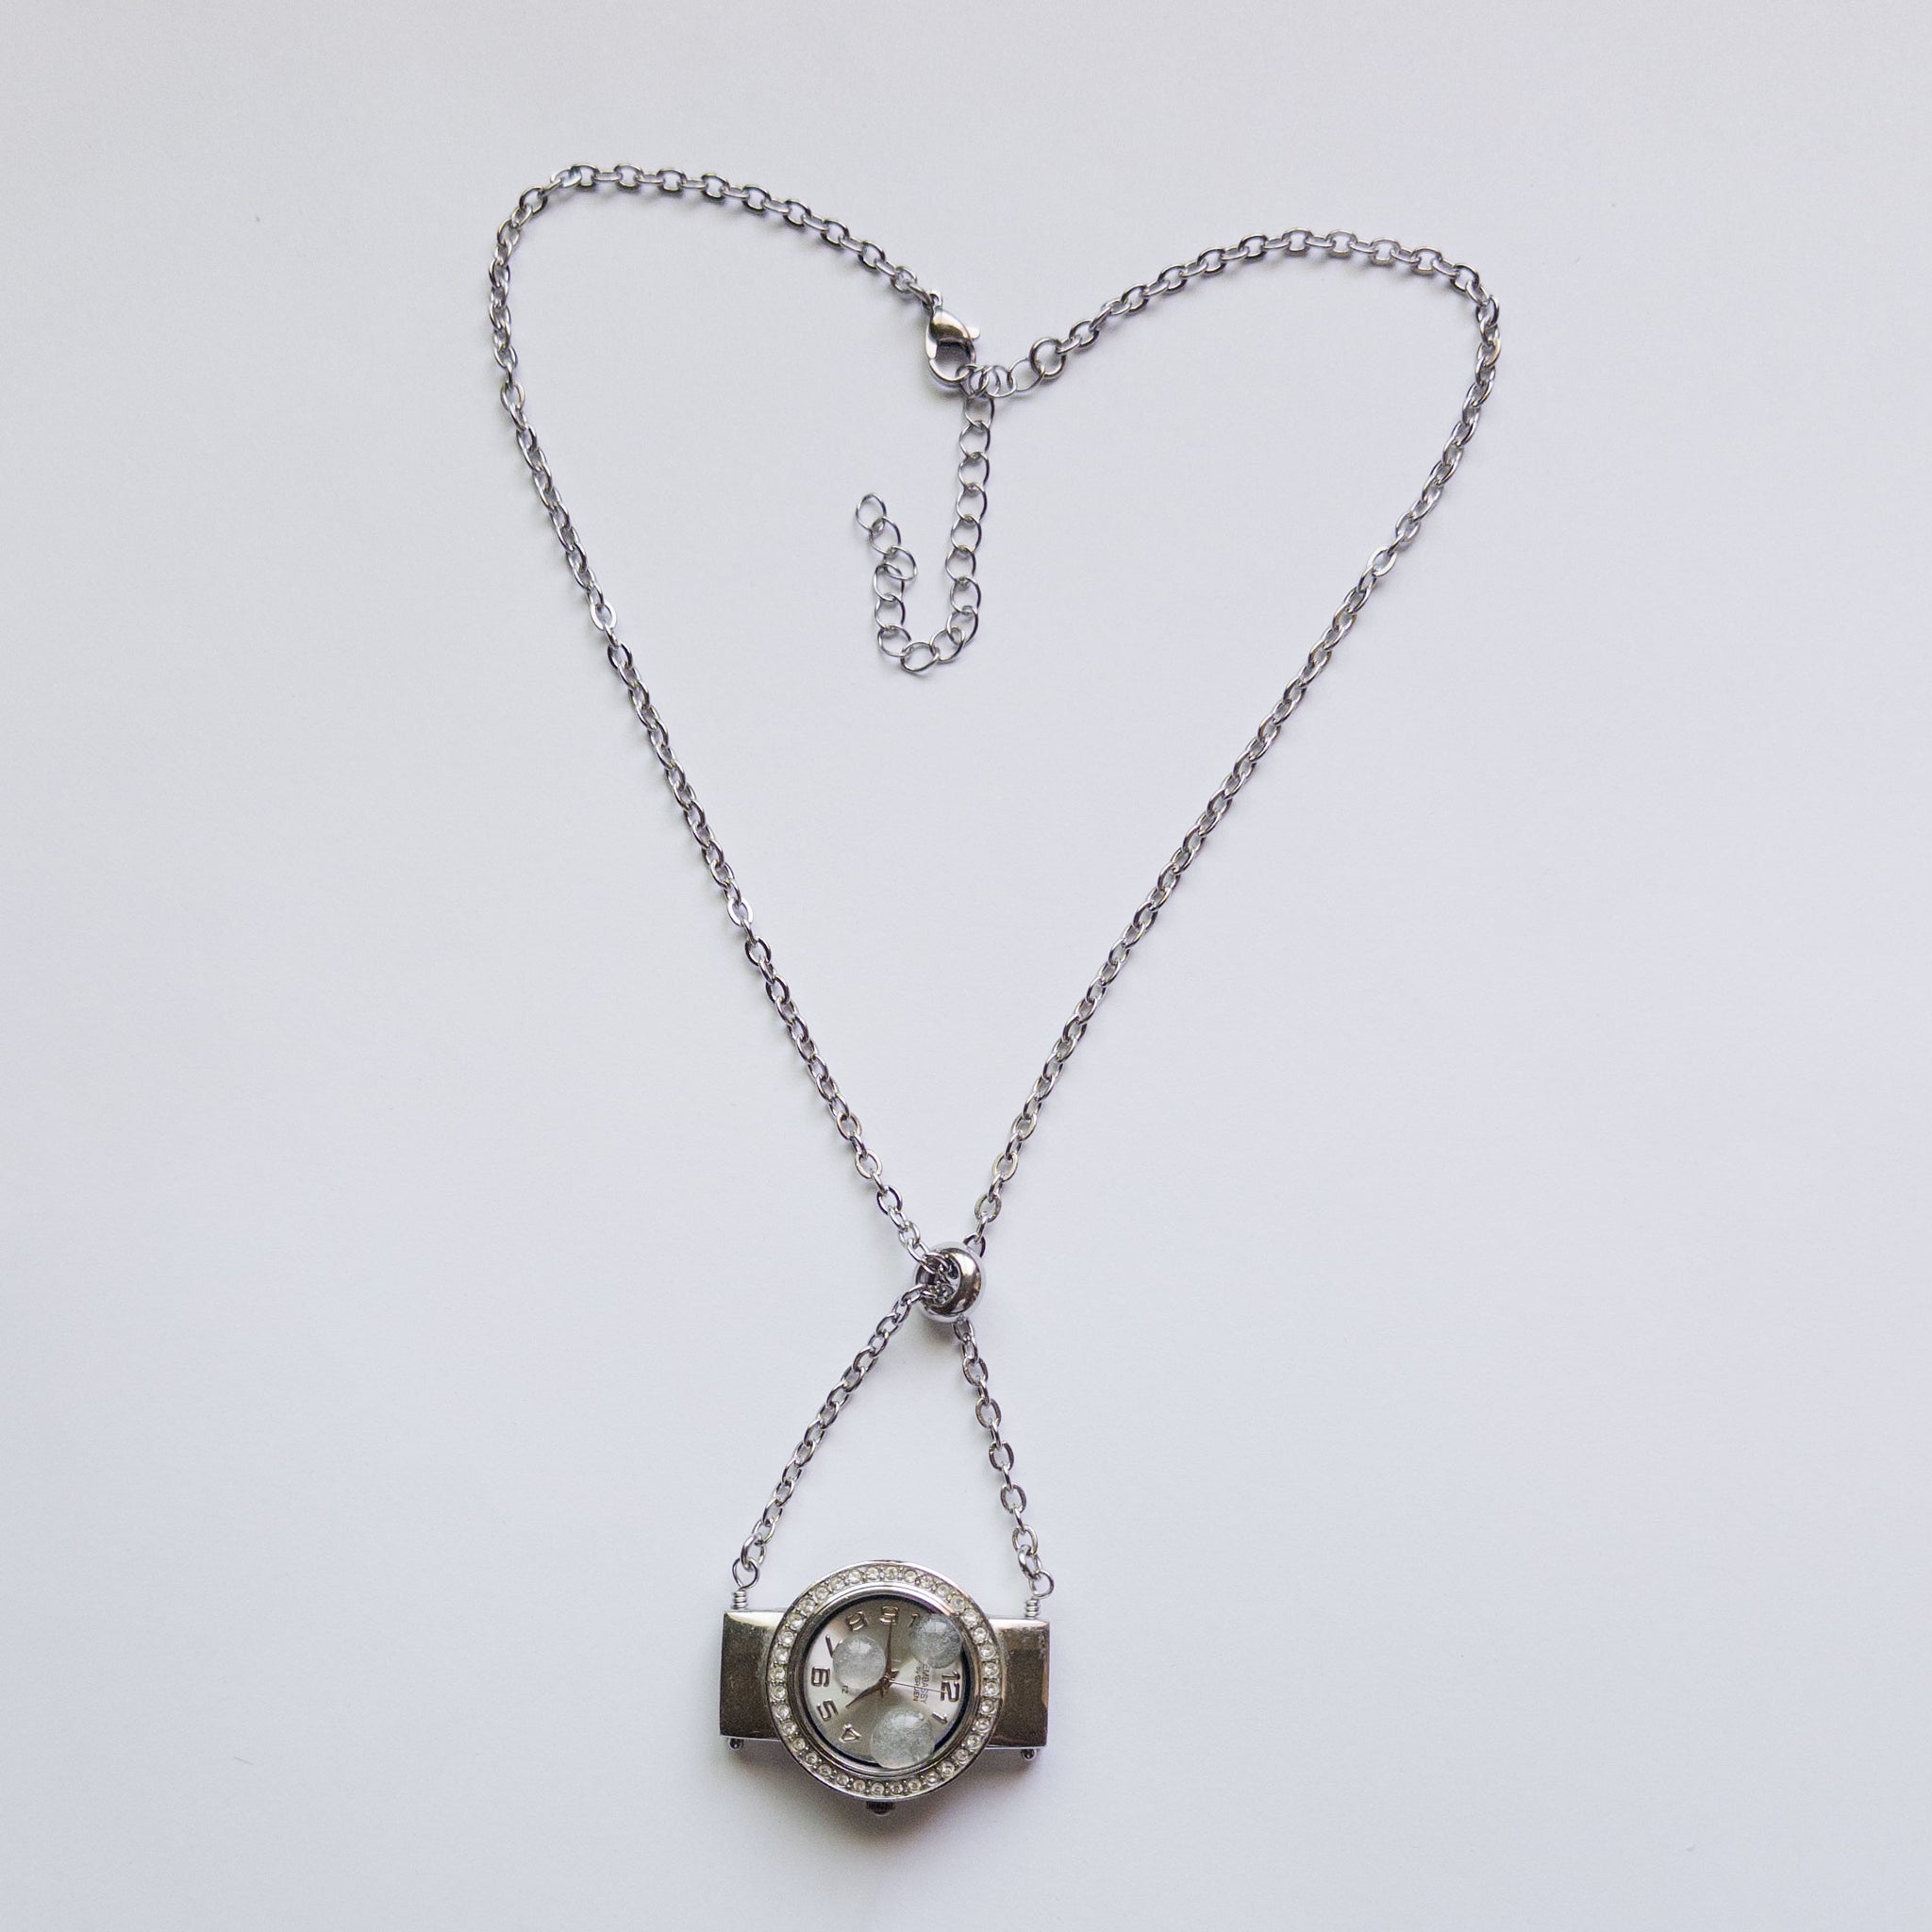 watch timepiece clock pendant necklace upcycled recycled vintage futuristic sustainable